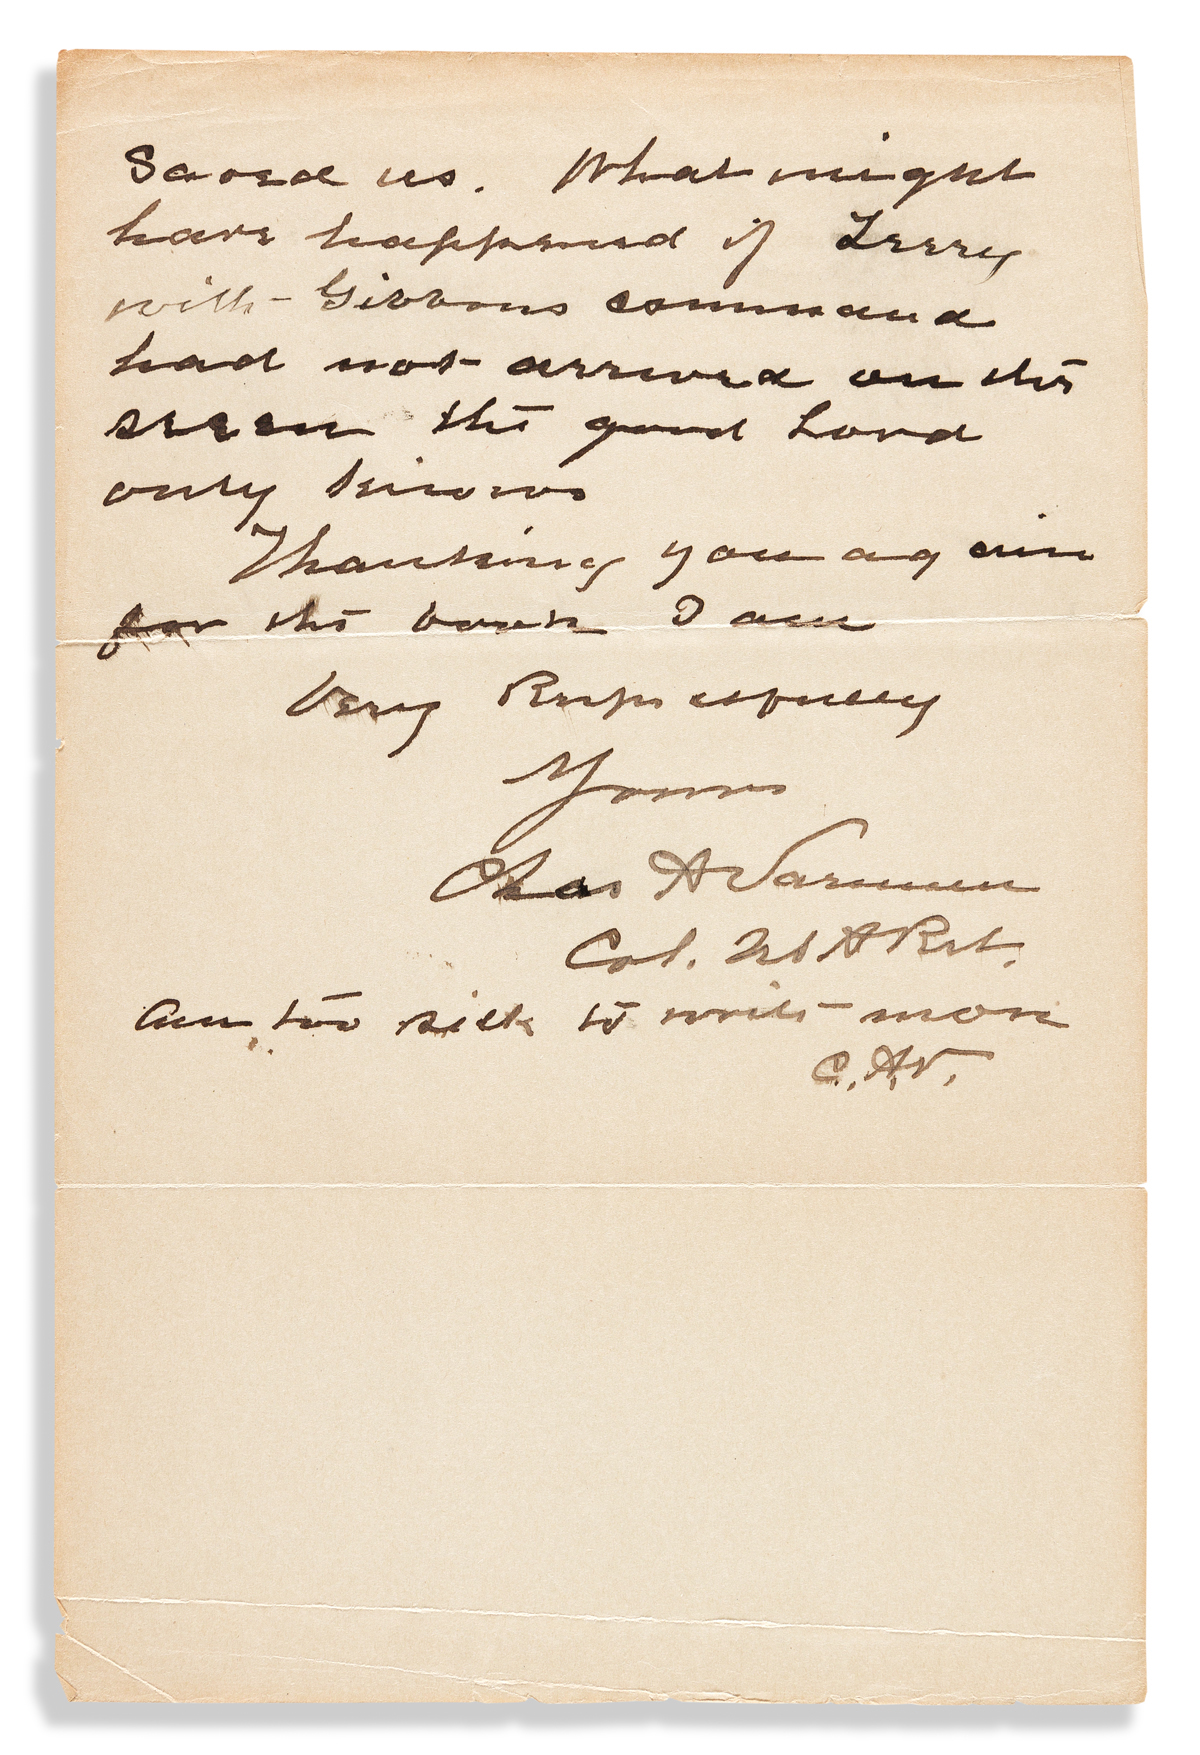 (GEORGE A. CUSTER.) Charles A. Varnum. Letter by the commander of Custers scouts, praising the book Glory Hunter.